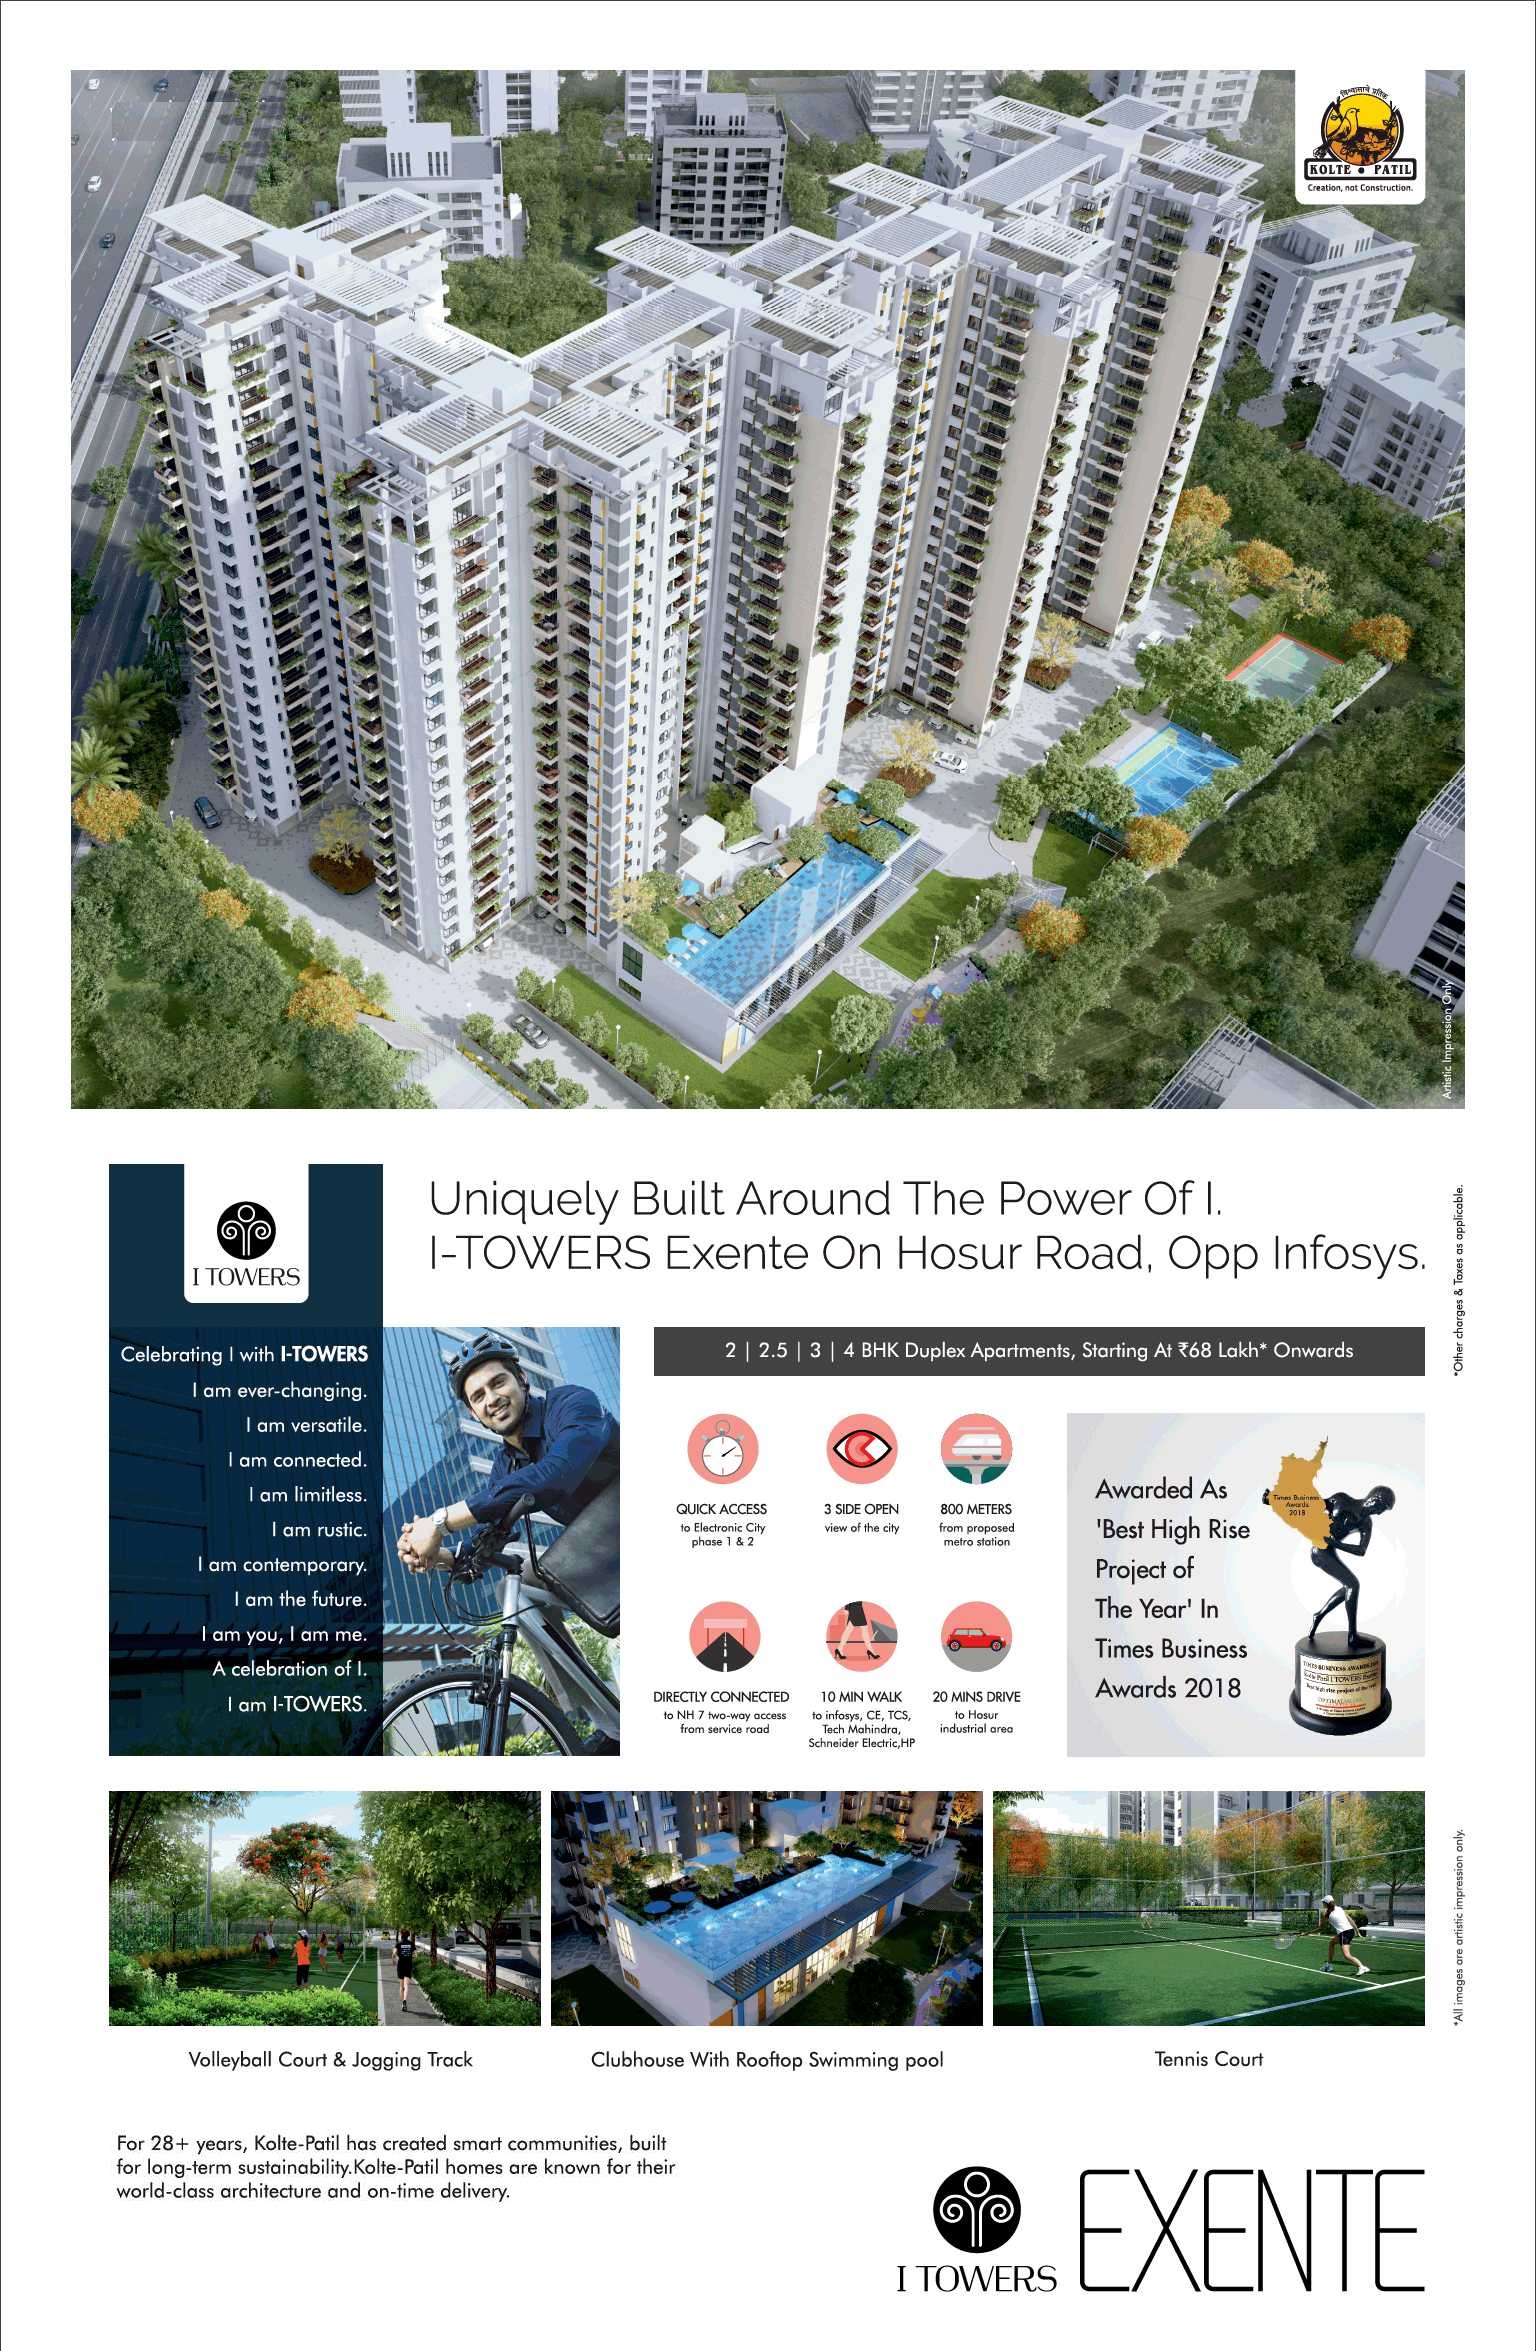 Book duplex apartments @ Rs.68 lakhs at Kolte Patil I Tower Exente in  Bangalore Update